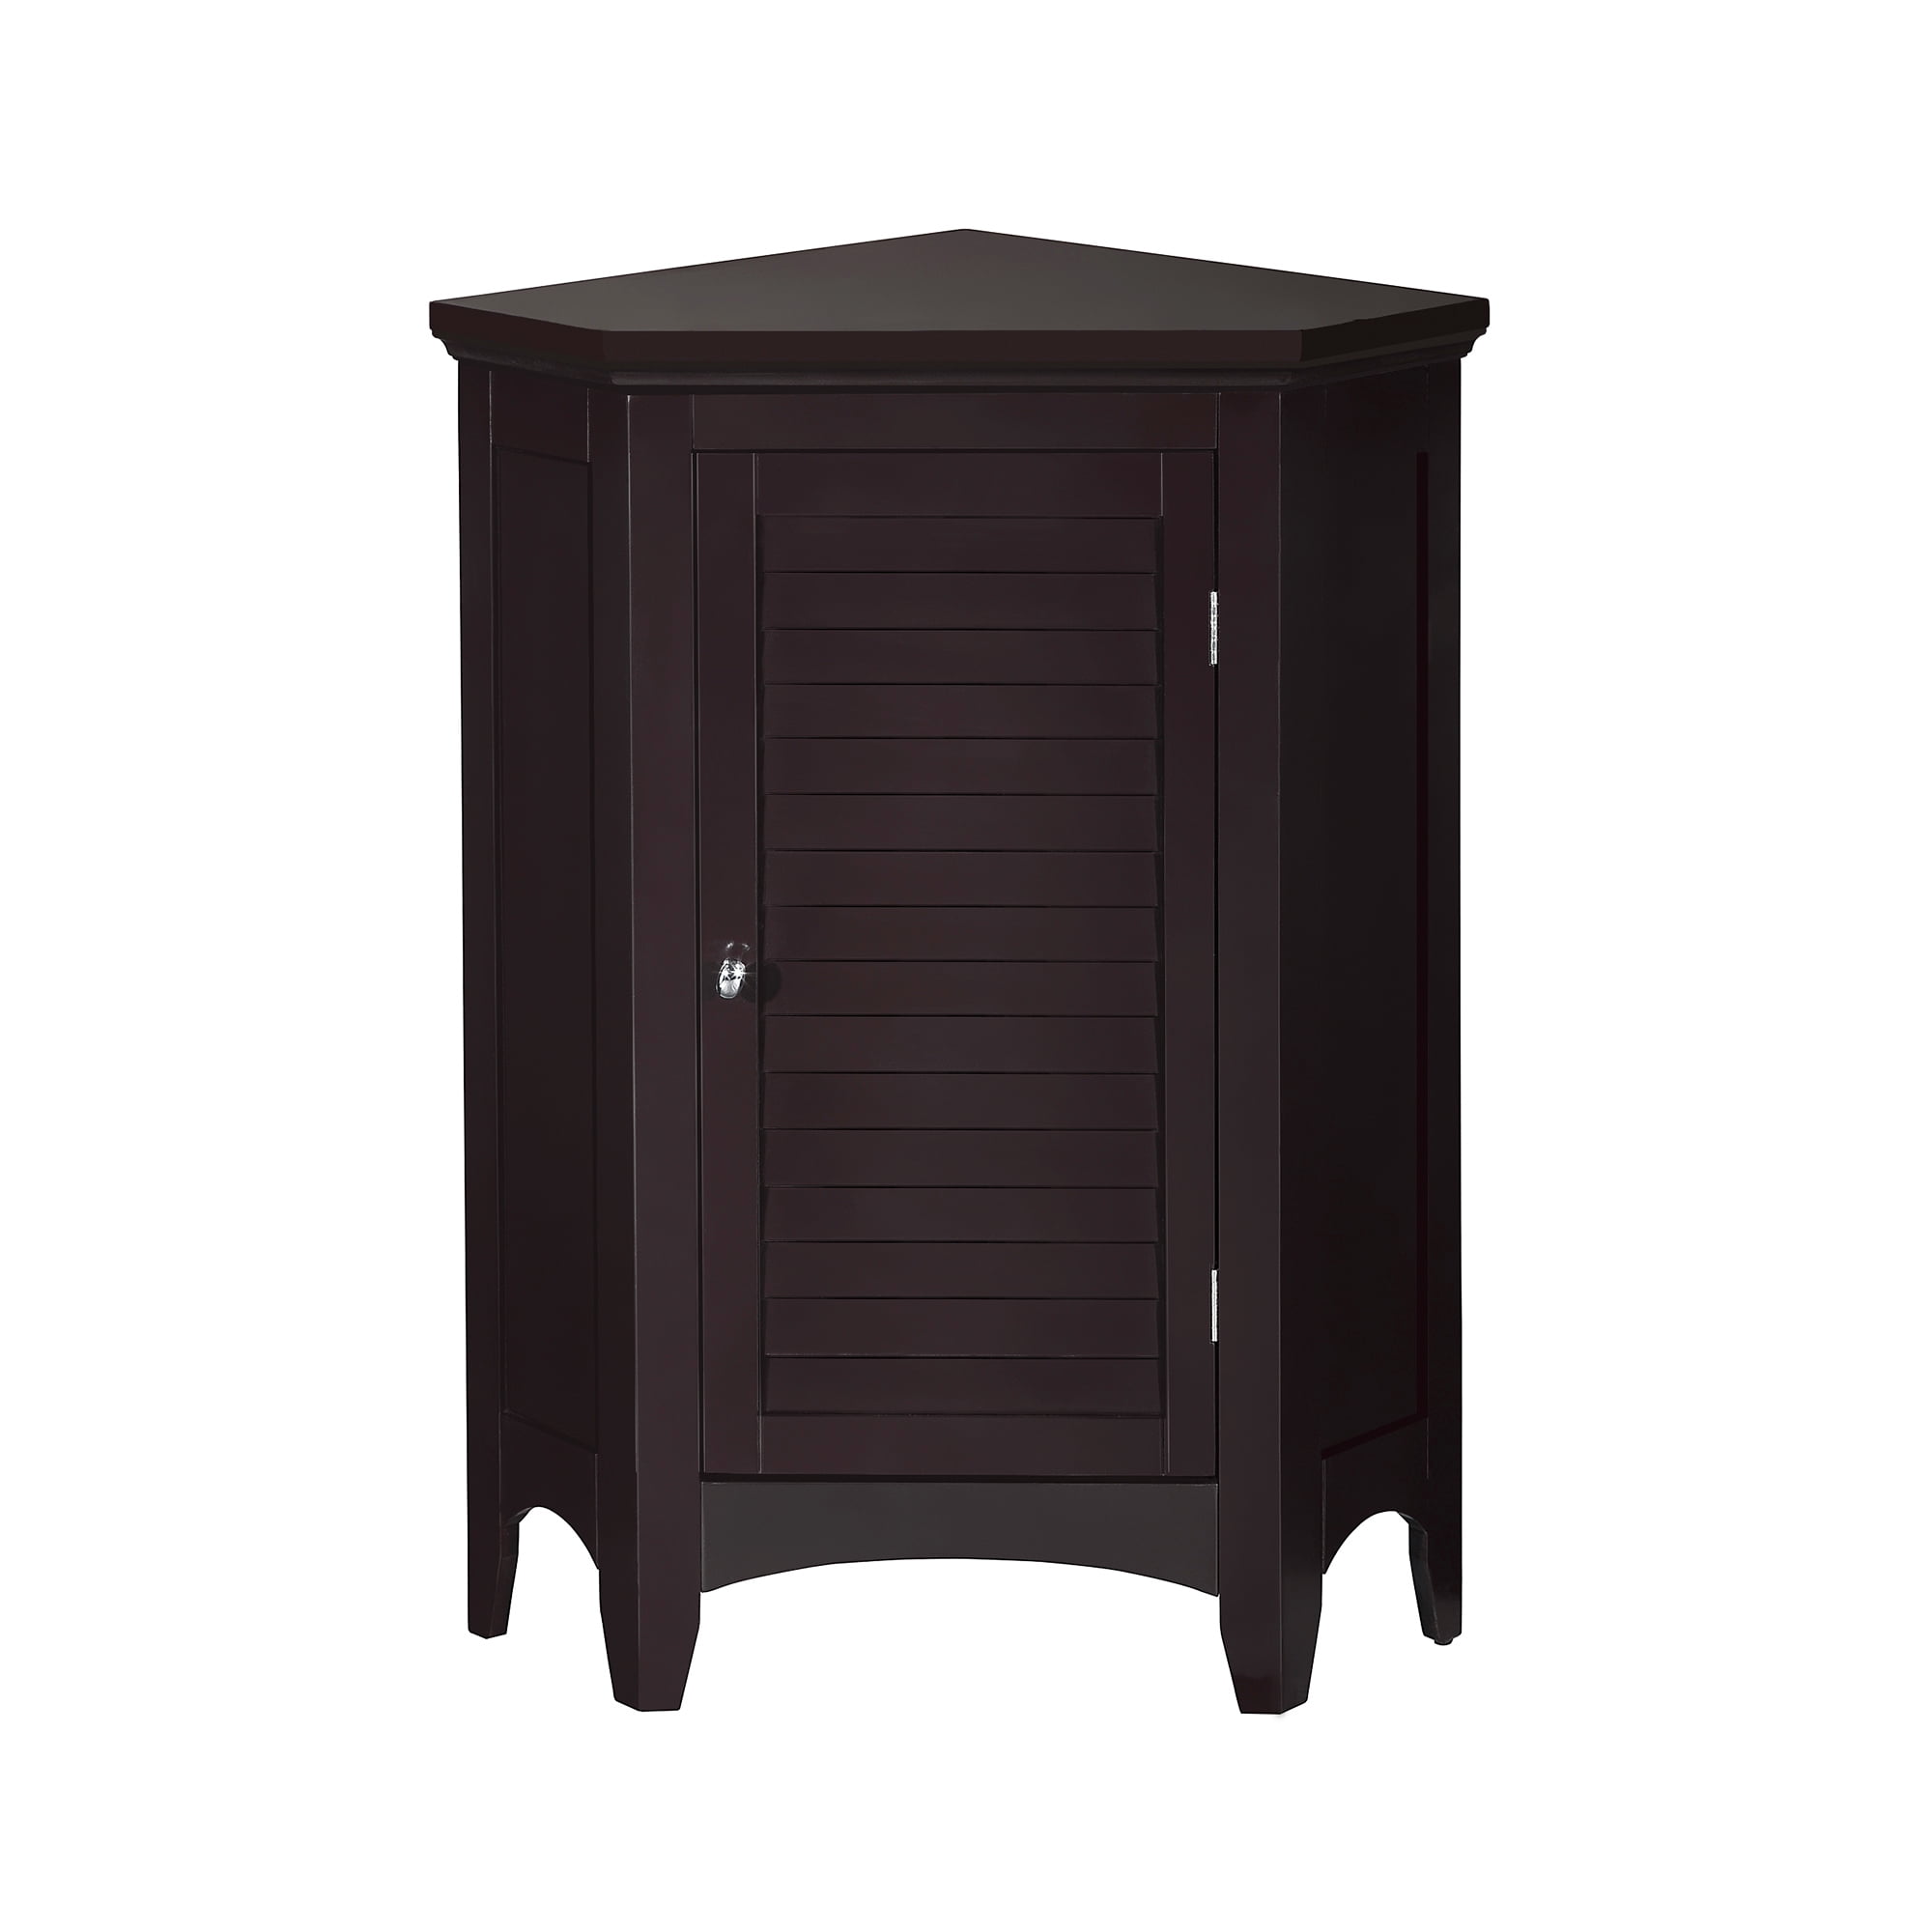 Elegant Home Fashions ELG-587 Slone Corner Wall Cabinet with 1 Shutter Door 